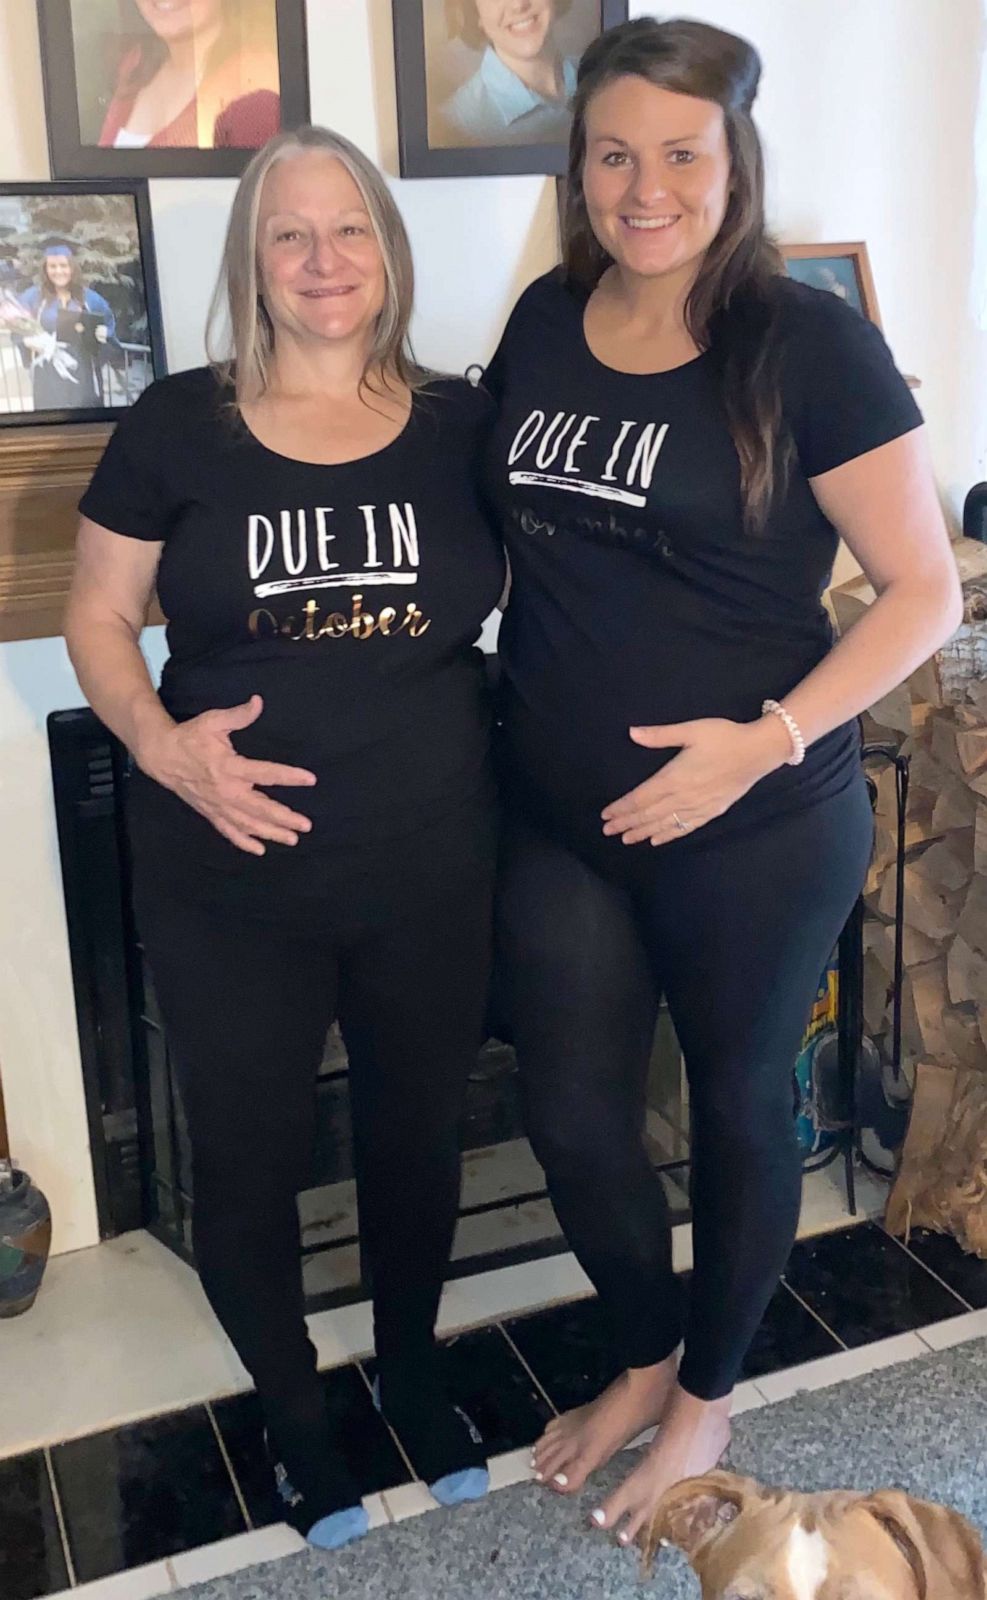 53 Year Old Mom And 31 Year Old Daughter Give Birth Weeks Apart To